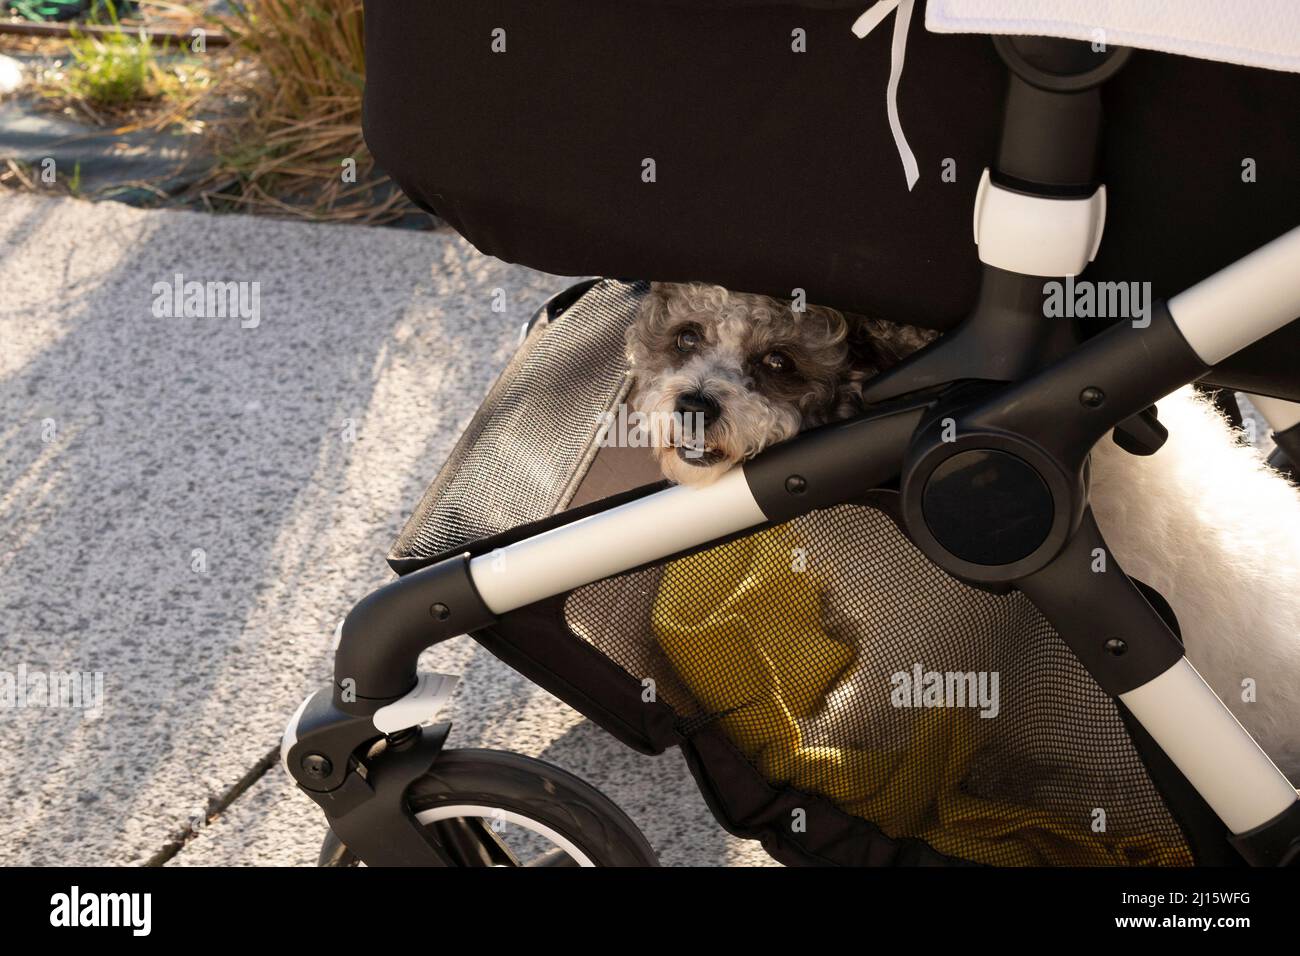 dog sitting in the basket of a newborn stroller Stock Photo